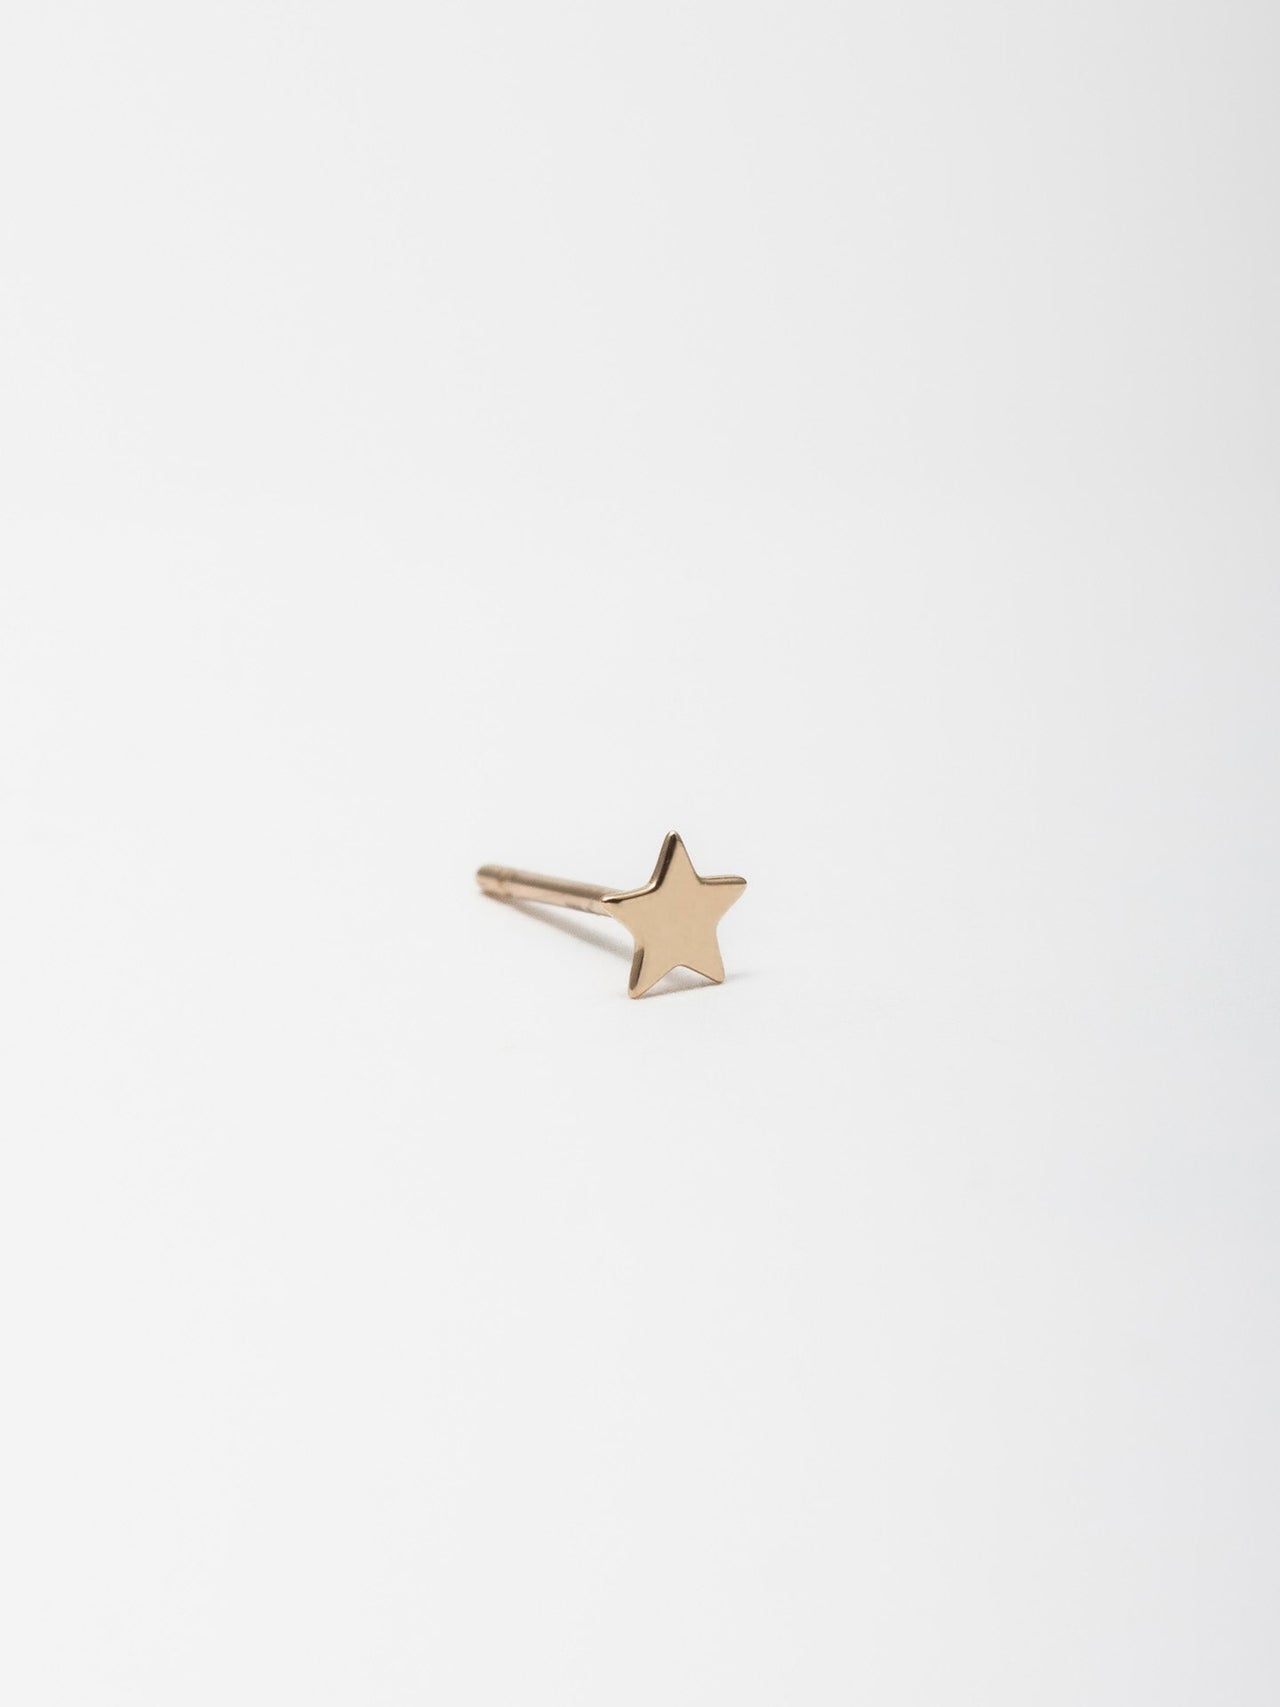 14kt Yellow Gold Mini Star Stud pictured on light grey background 